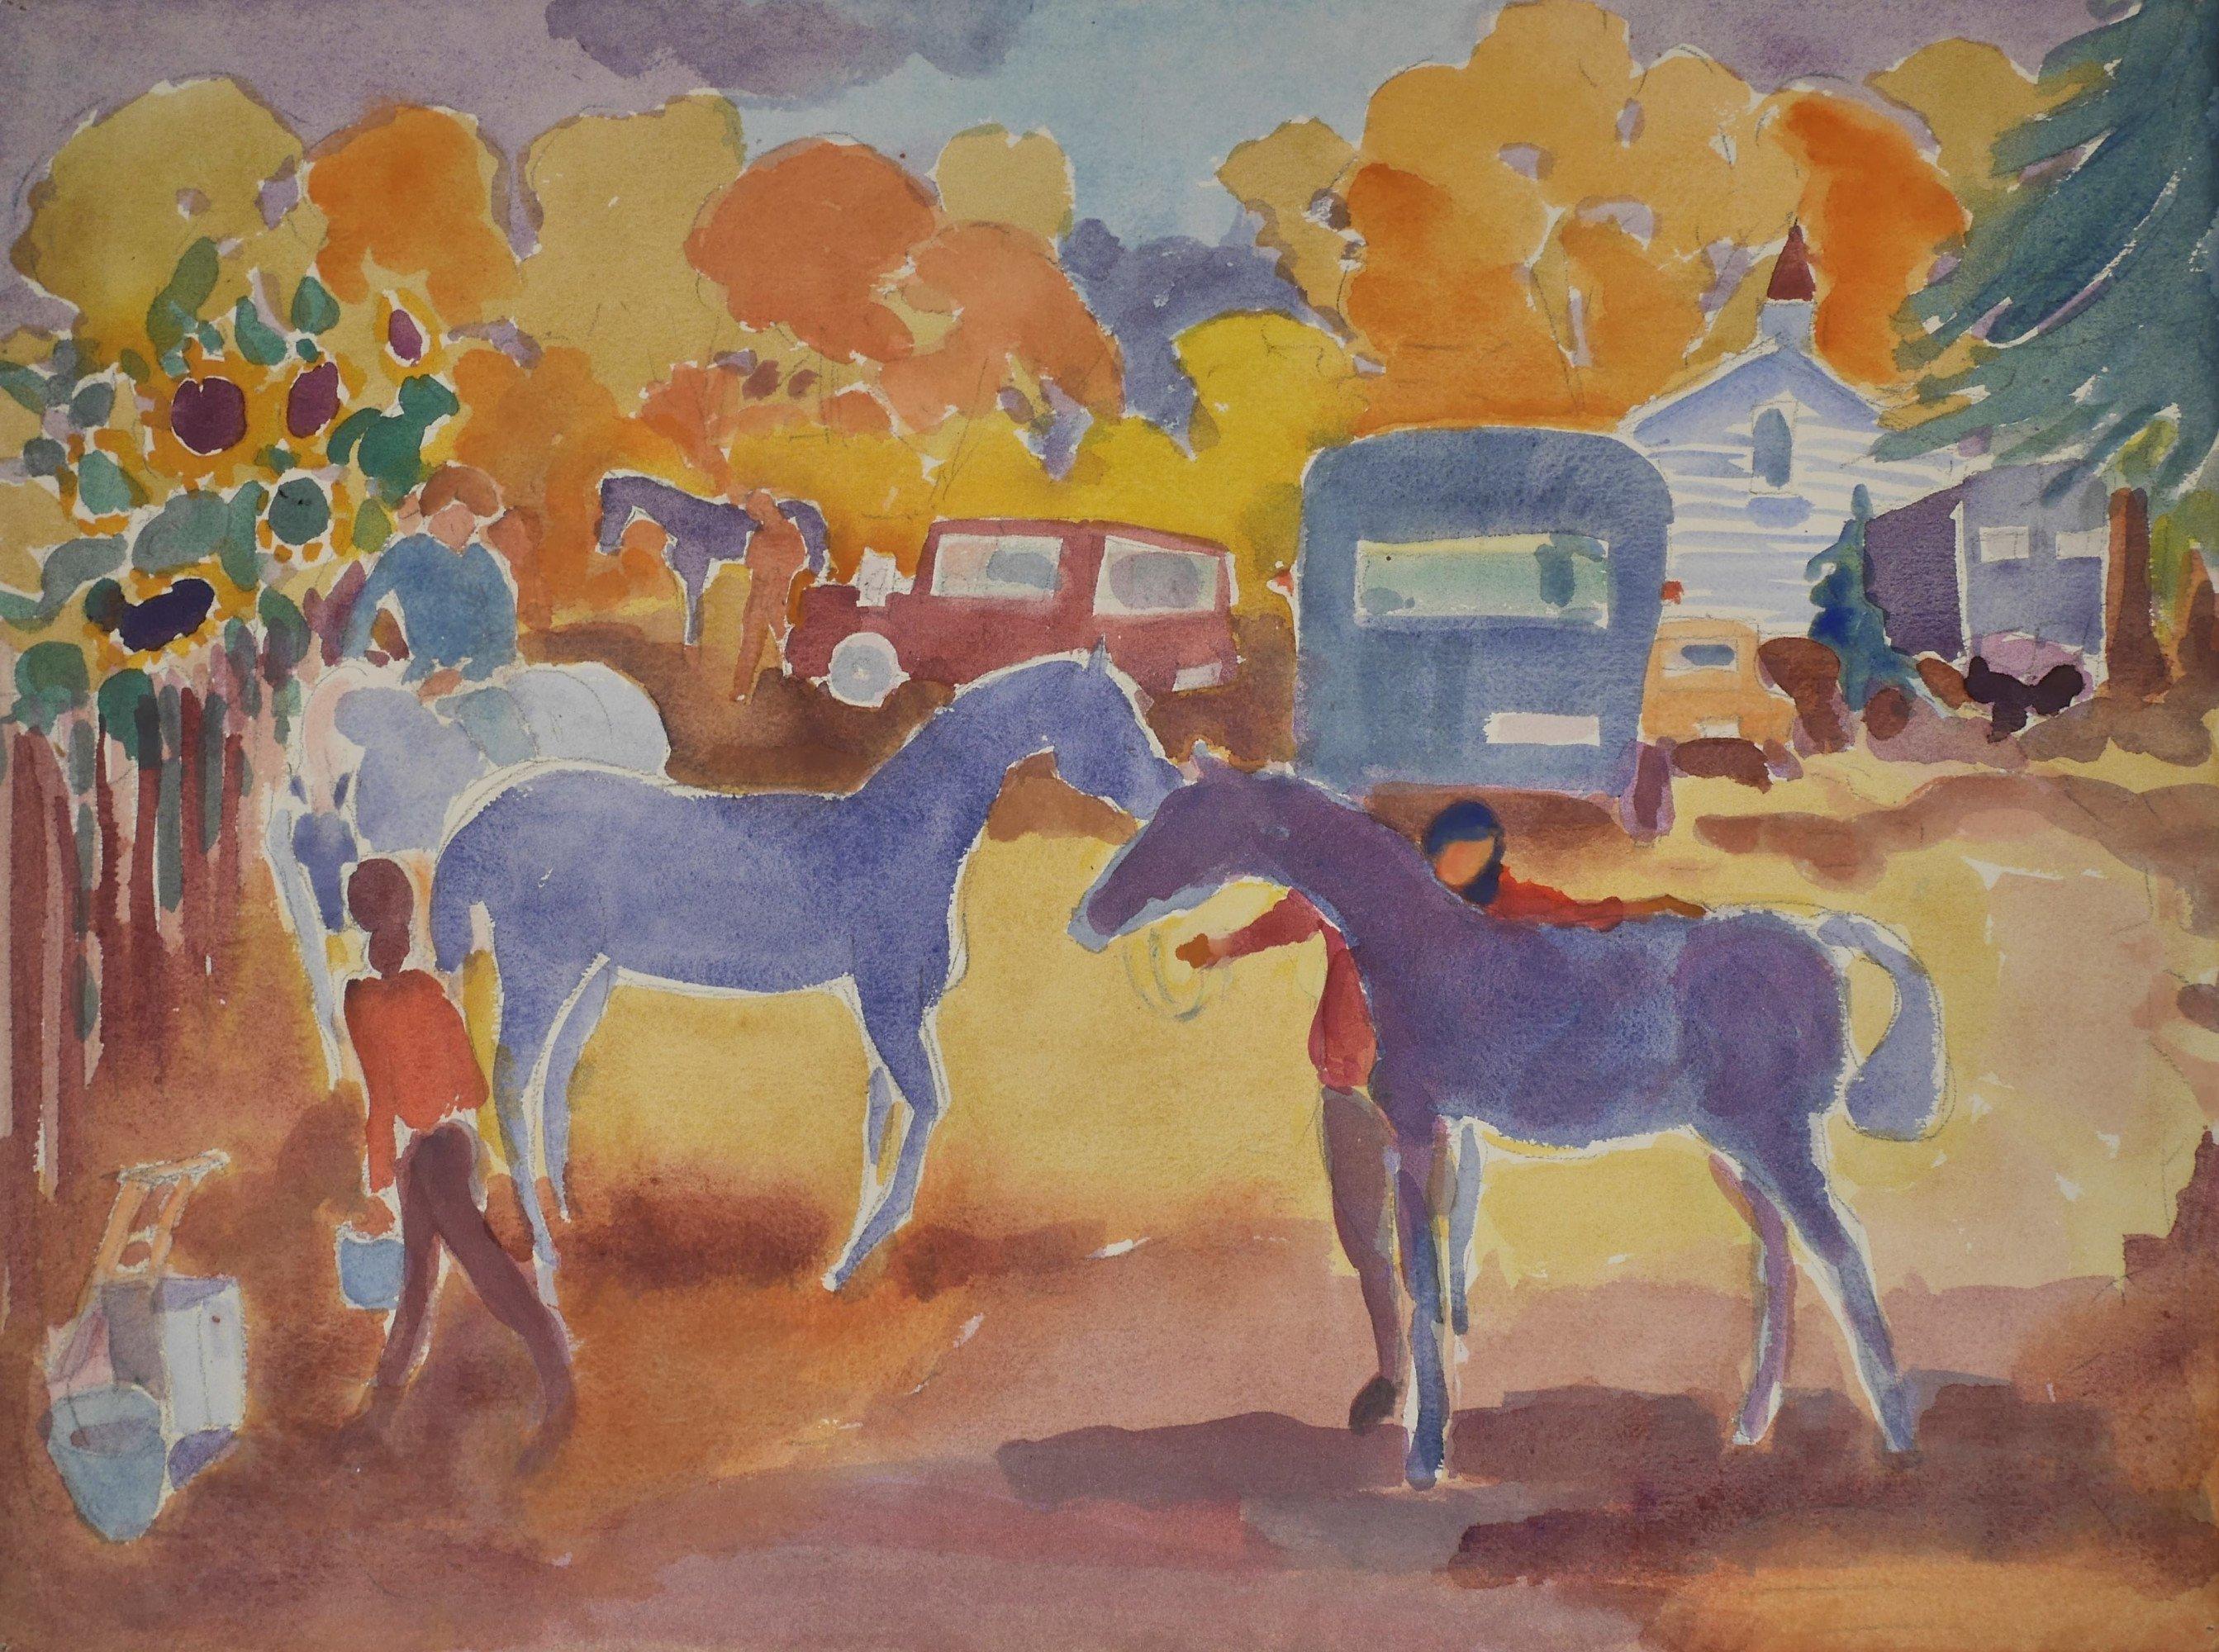 Algesa O'Sickey (American, 1917-2006)
Horse Show Preparations 
Watercolor and graphite on paper
Unsigned
18 x 24 inches
23.25 x 29 inches, framed

Born Algesa D’Agostino on June 4, 1917, Algesa was born in Uganda. In 1929 she moved to Cleveland